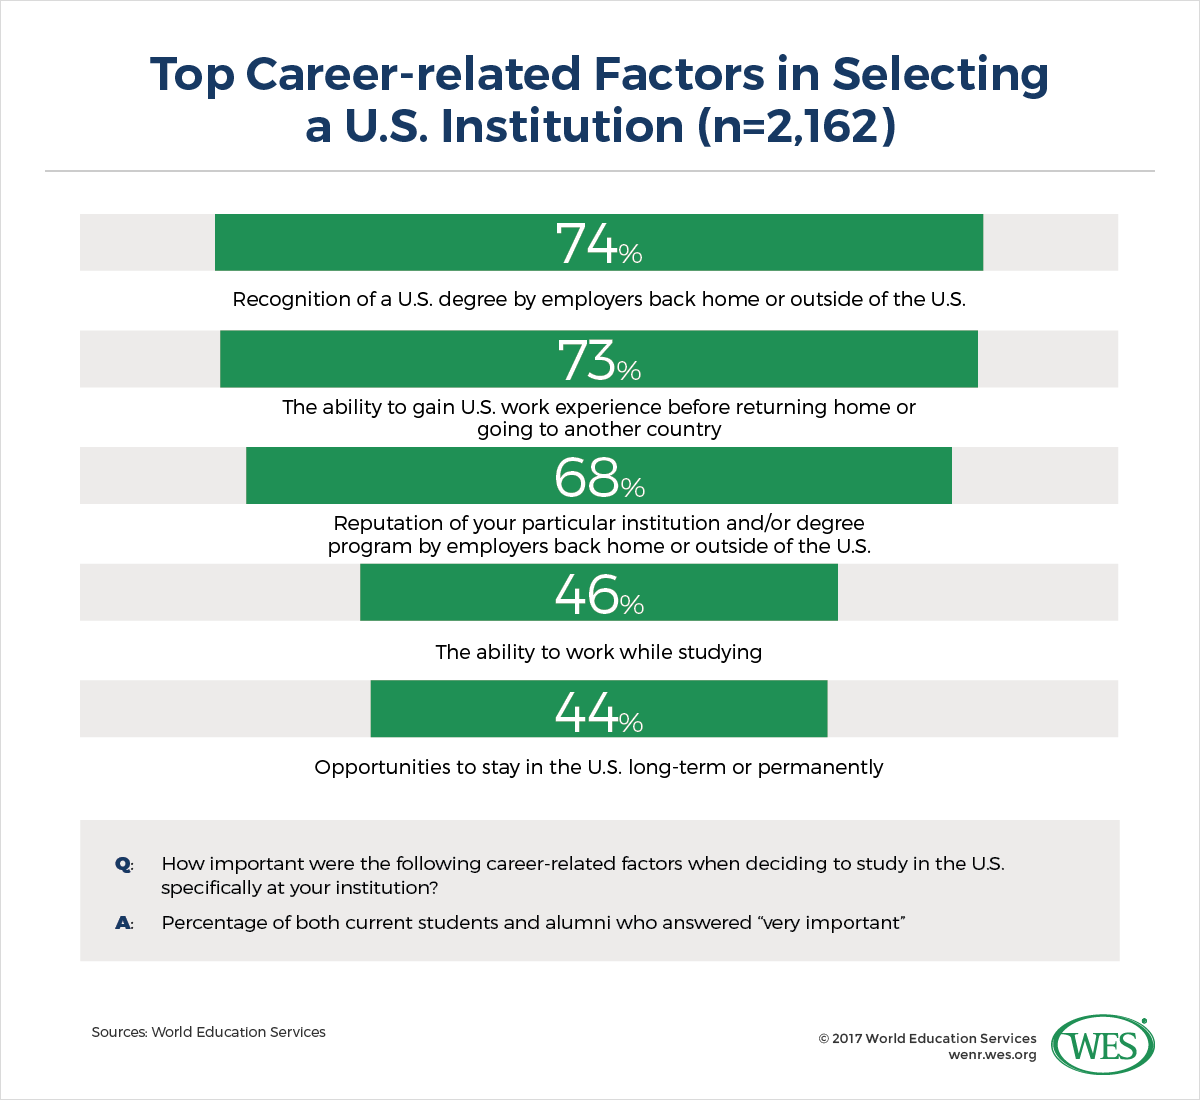 A chart showing the top career-related factors in selecting a U.S. institutions among surveyed international students. 